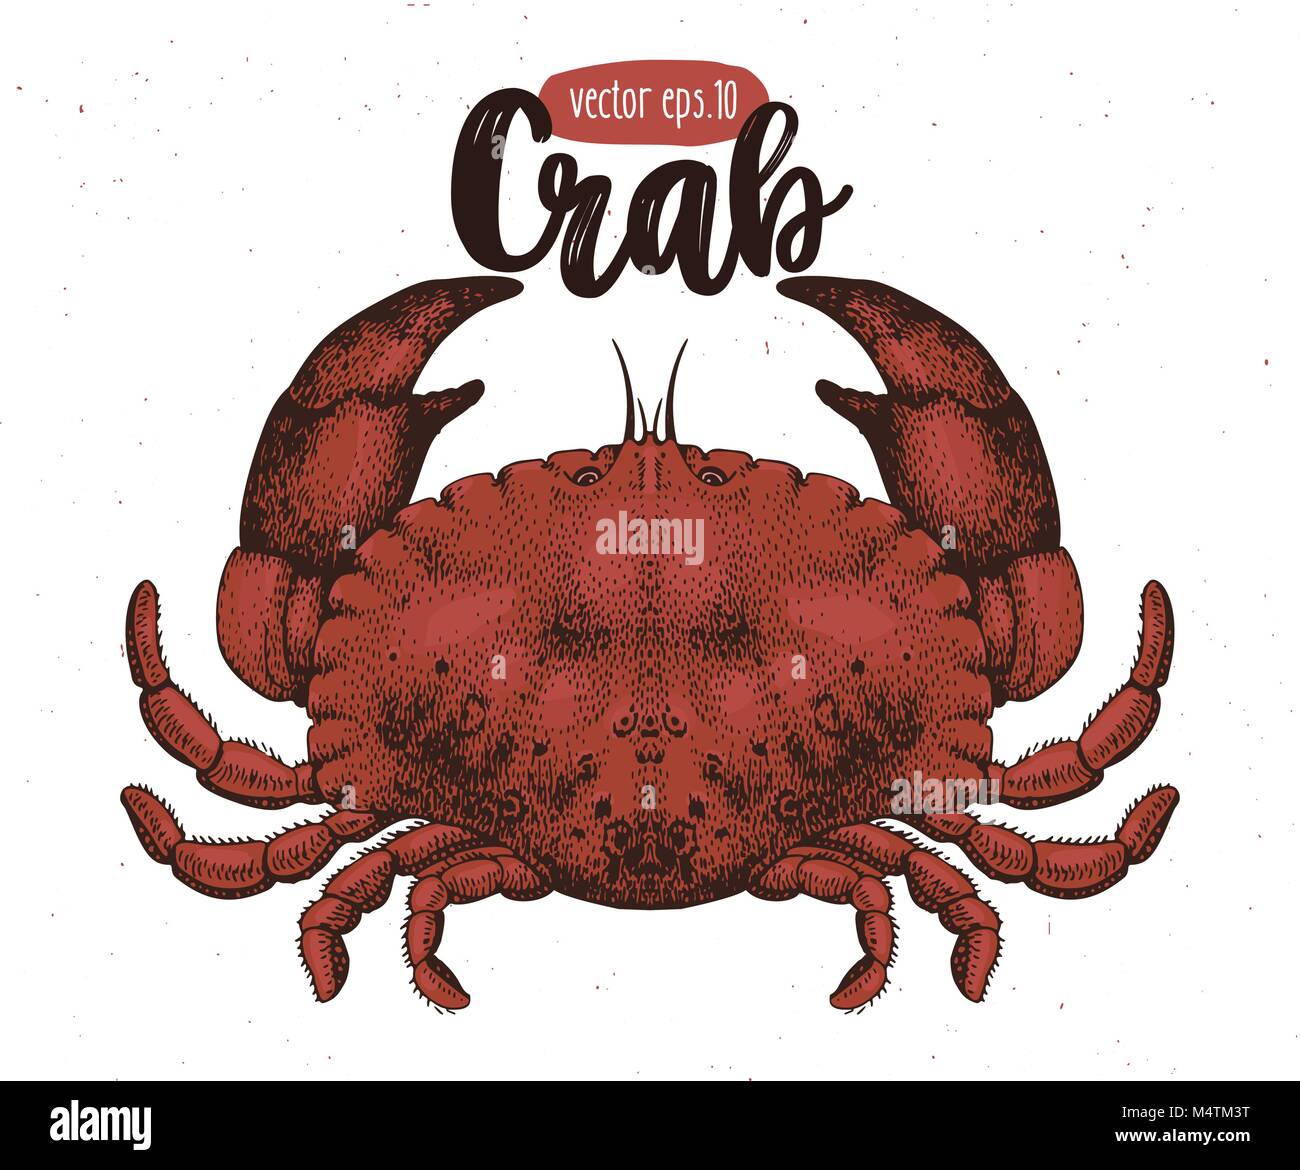 Vector seafood illustration. Crab retro lillustration. Hand drawing sketch omar. Can be use for restaurant menu, kitchen design, paper, wrapping, fabrics. Stock Vector